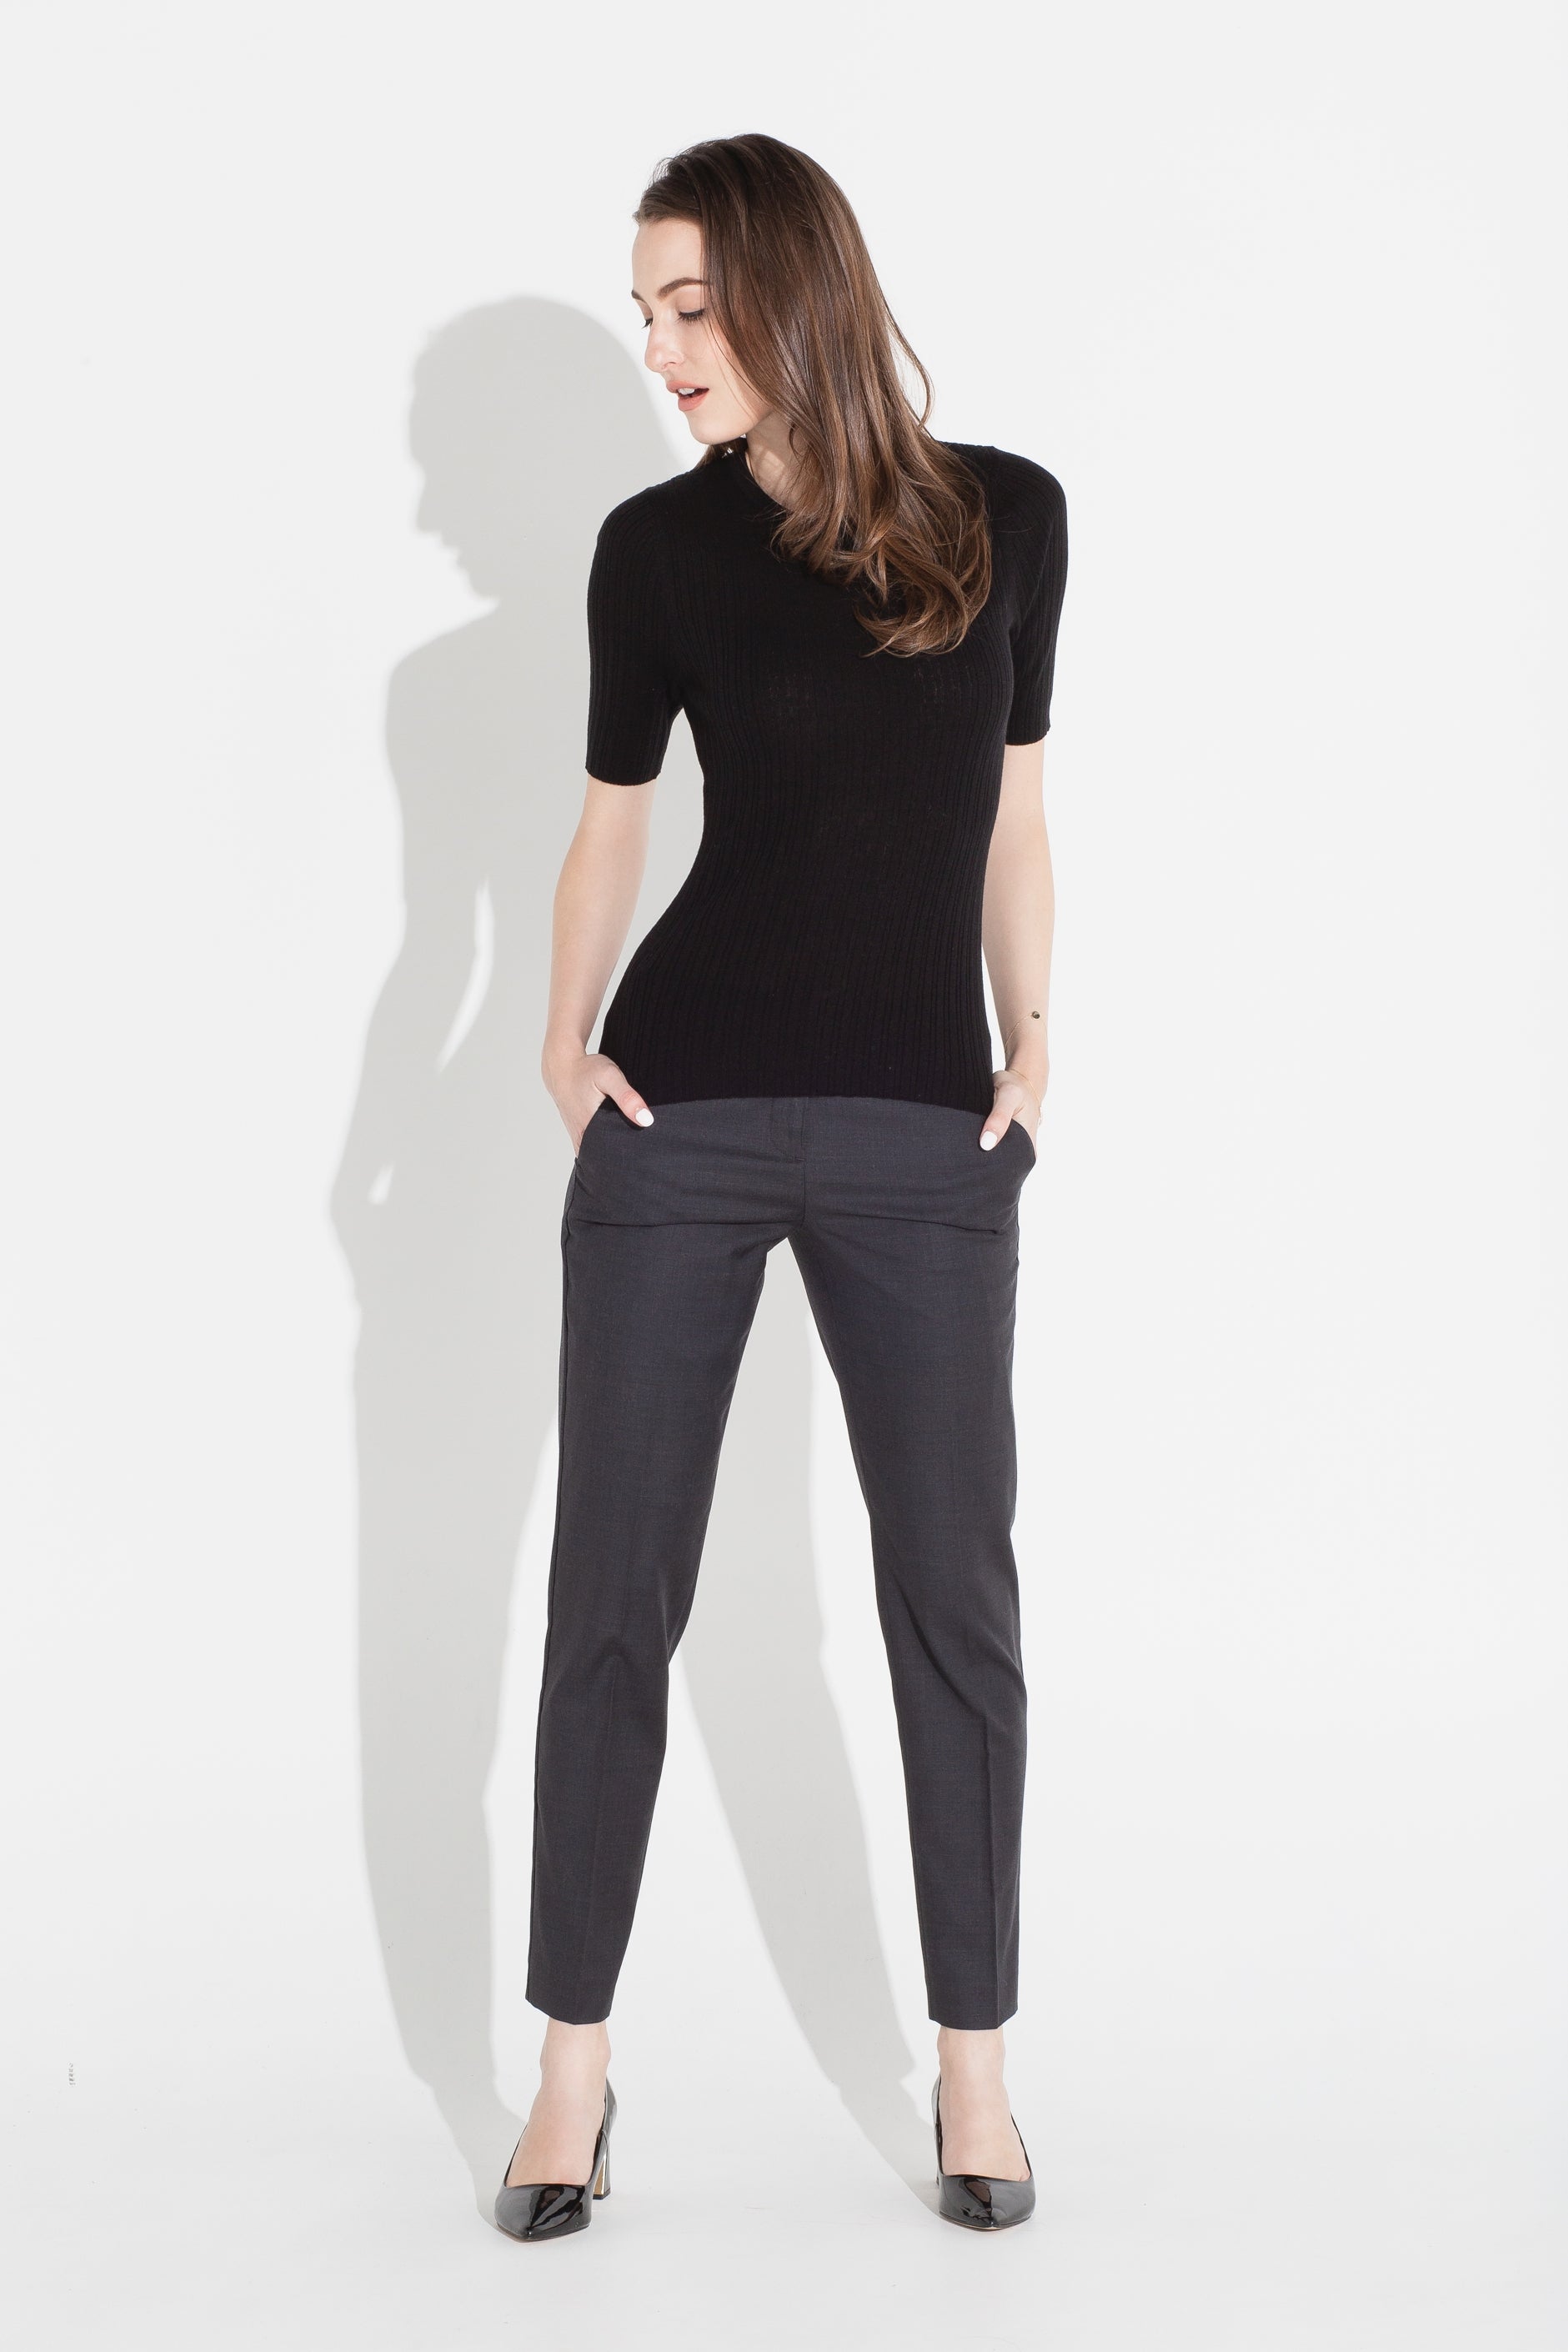 Tailored Trouser - Black Heather (Tall)